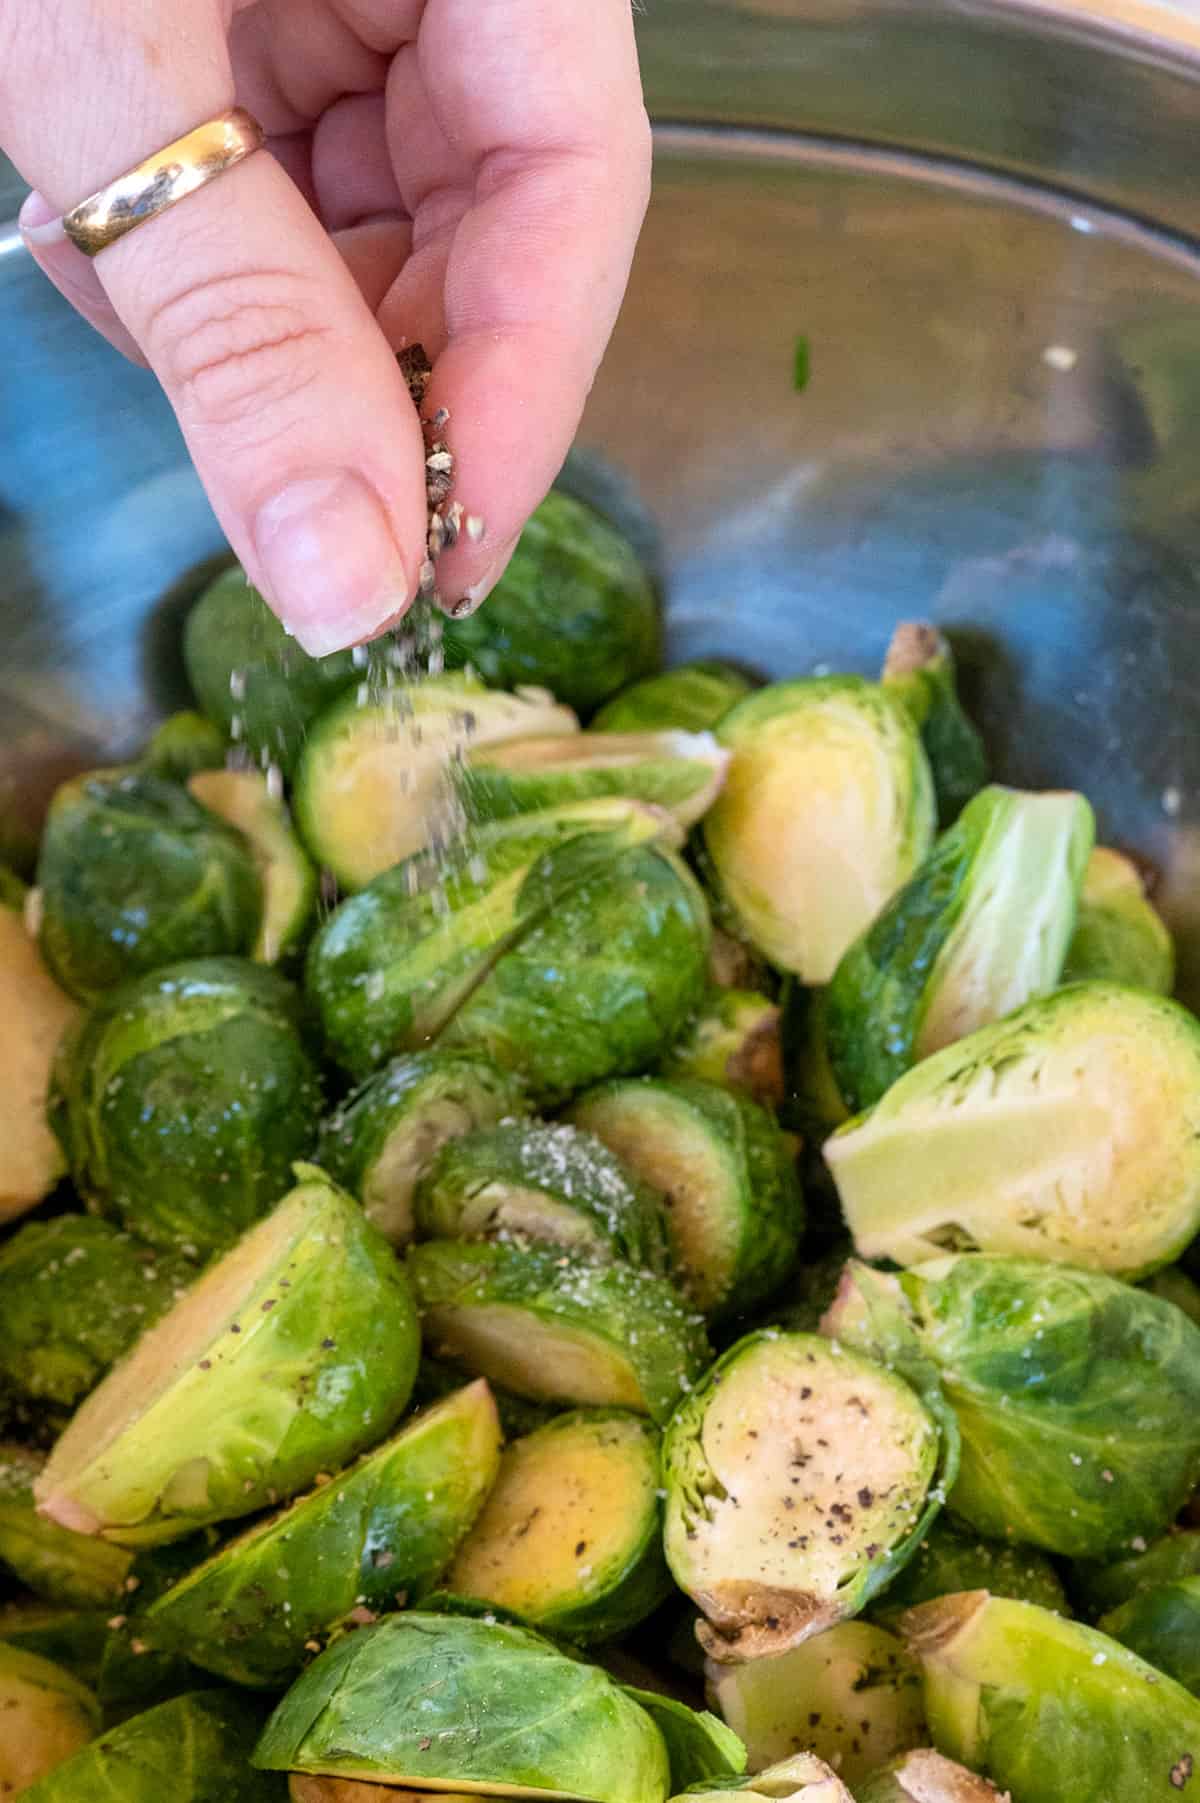 hand sprinkling black pepper on halved brussels sprouts.